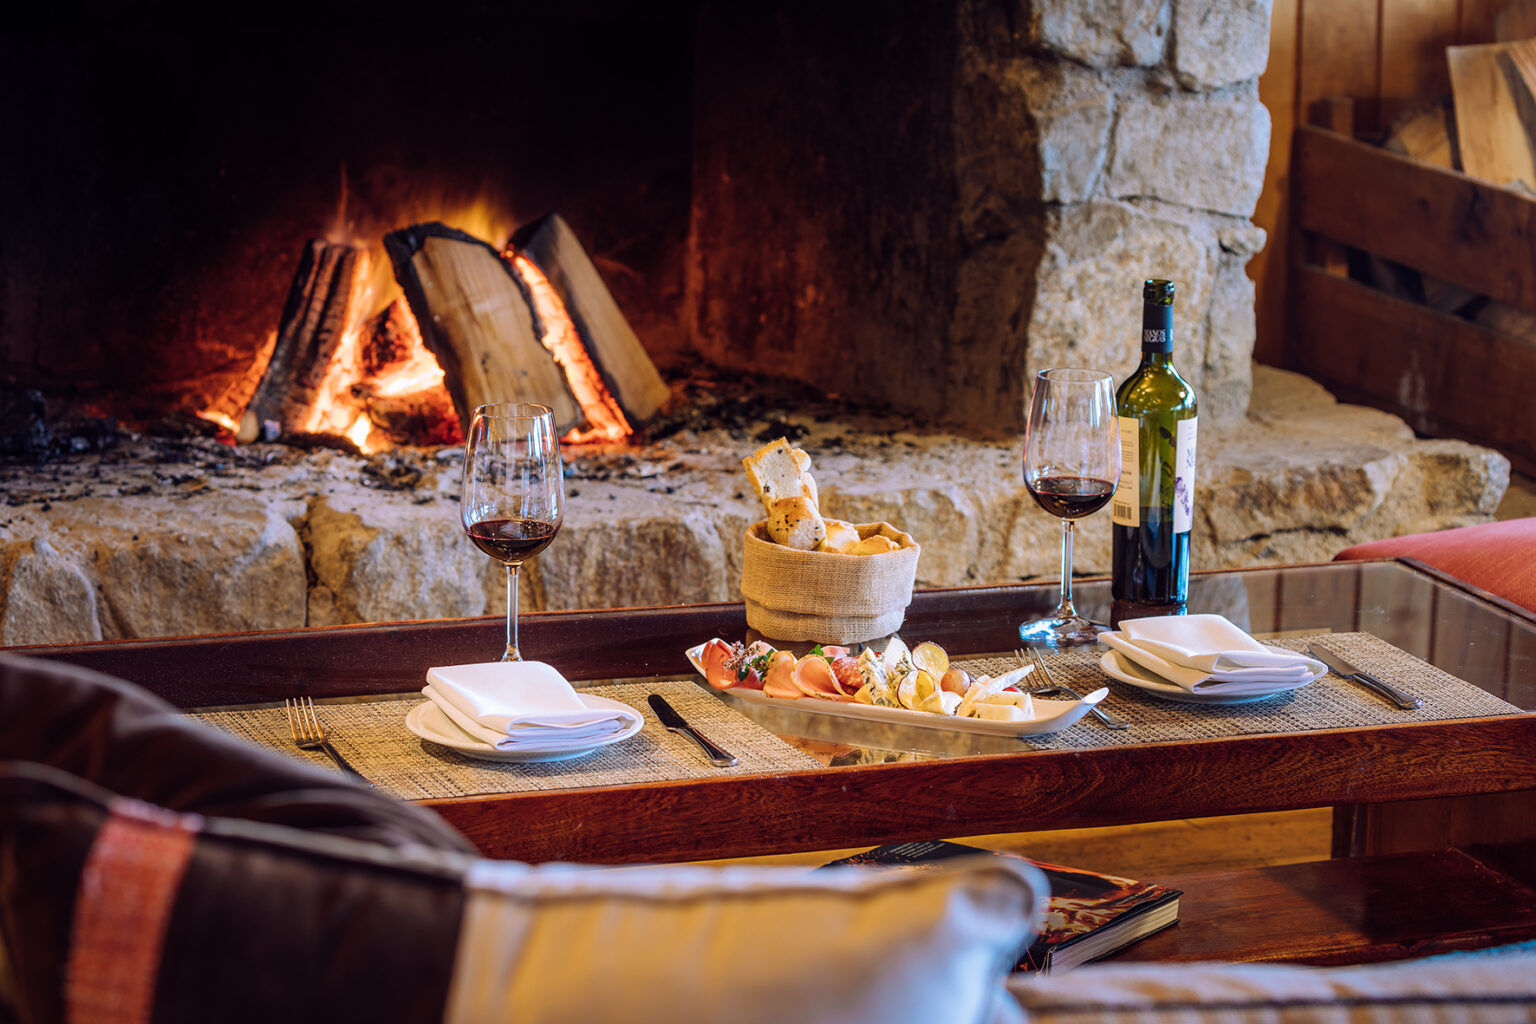 Table in front of fireplace with wine and bread